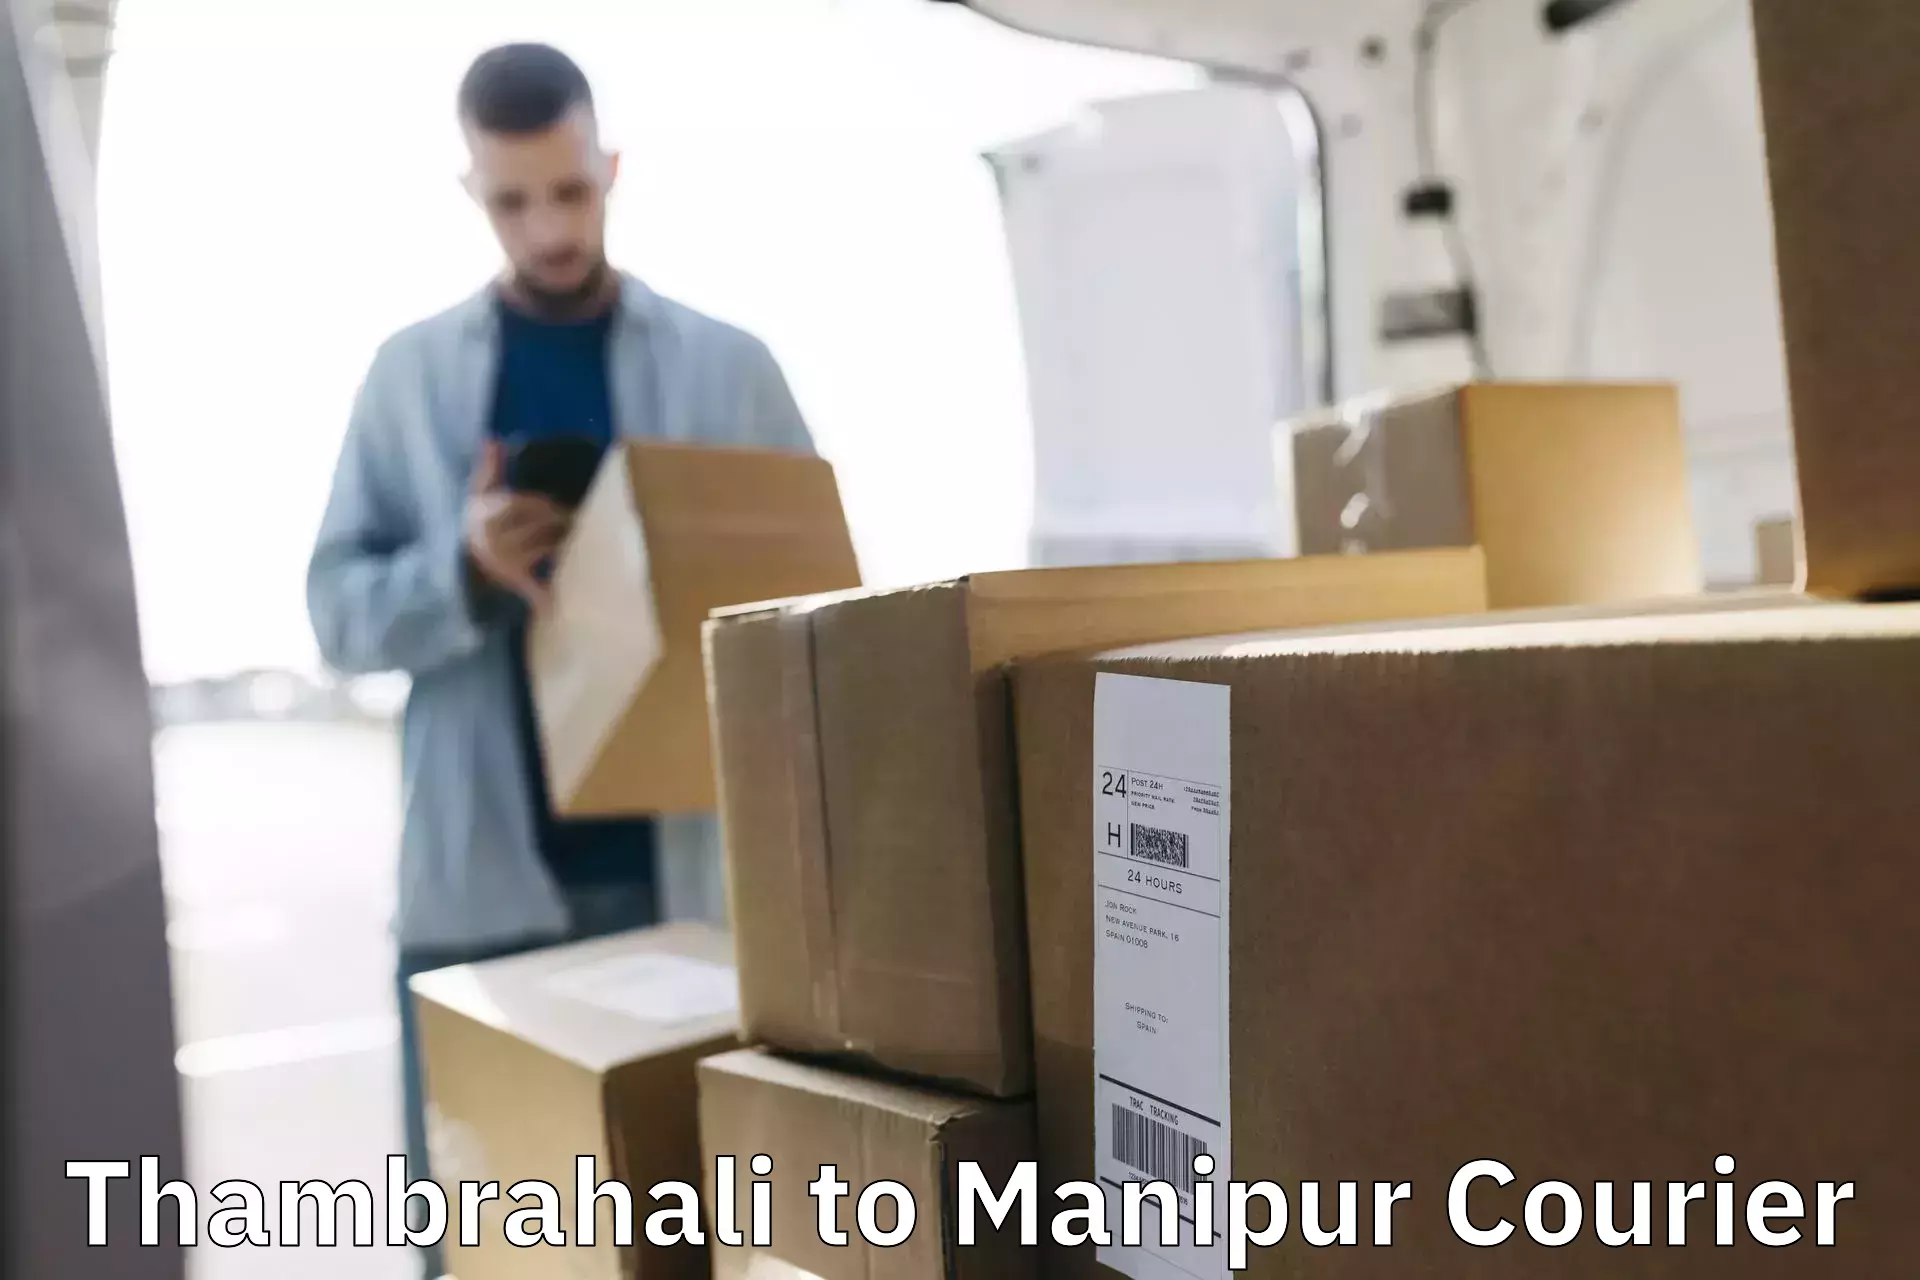 International courier networks Thambrahali to Chandel